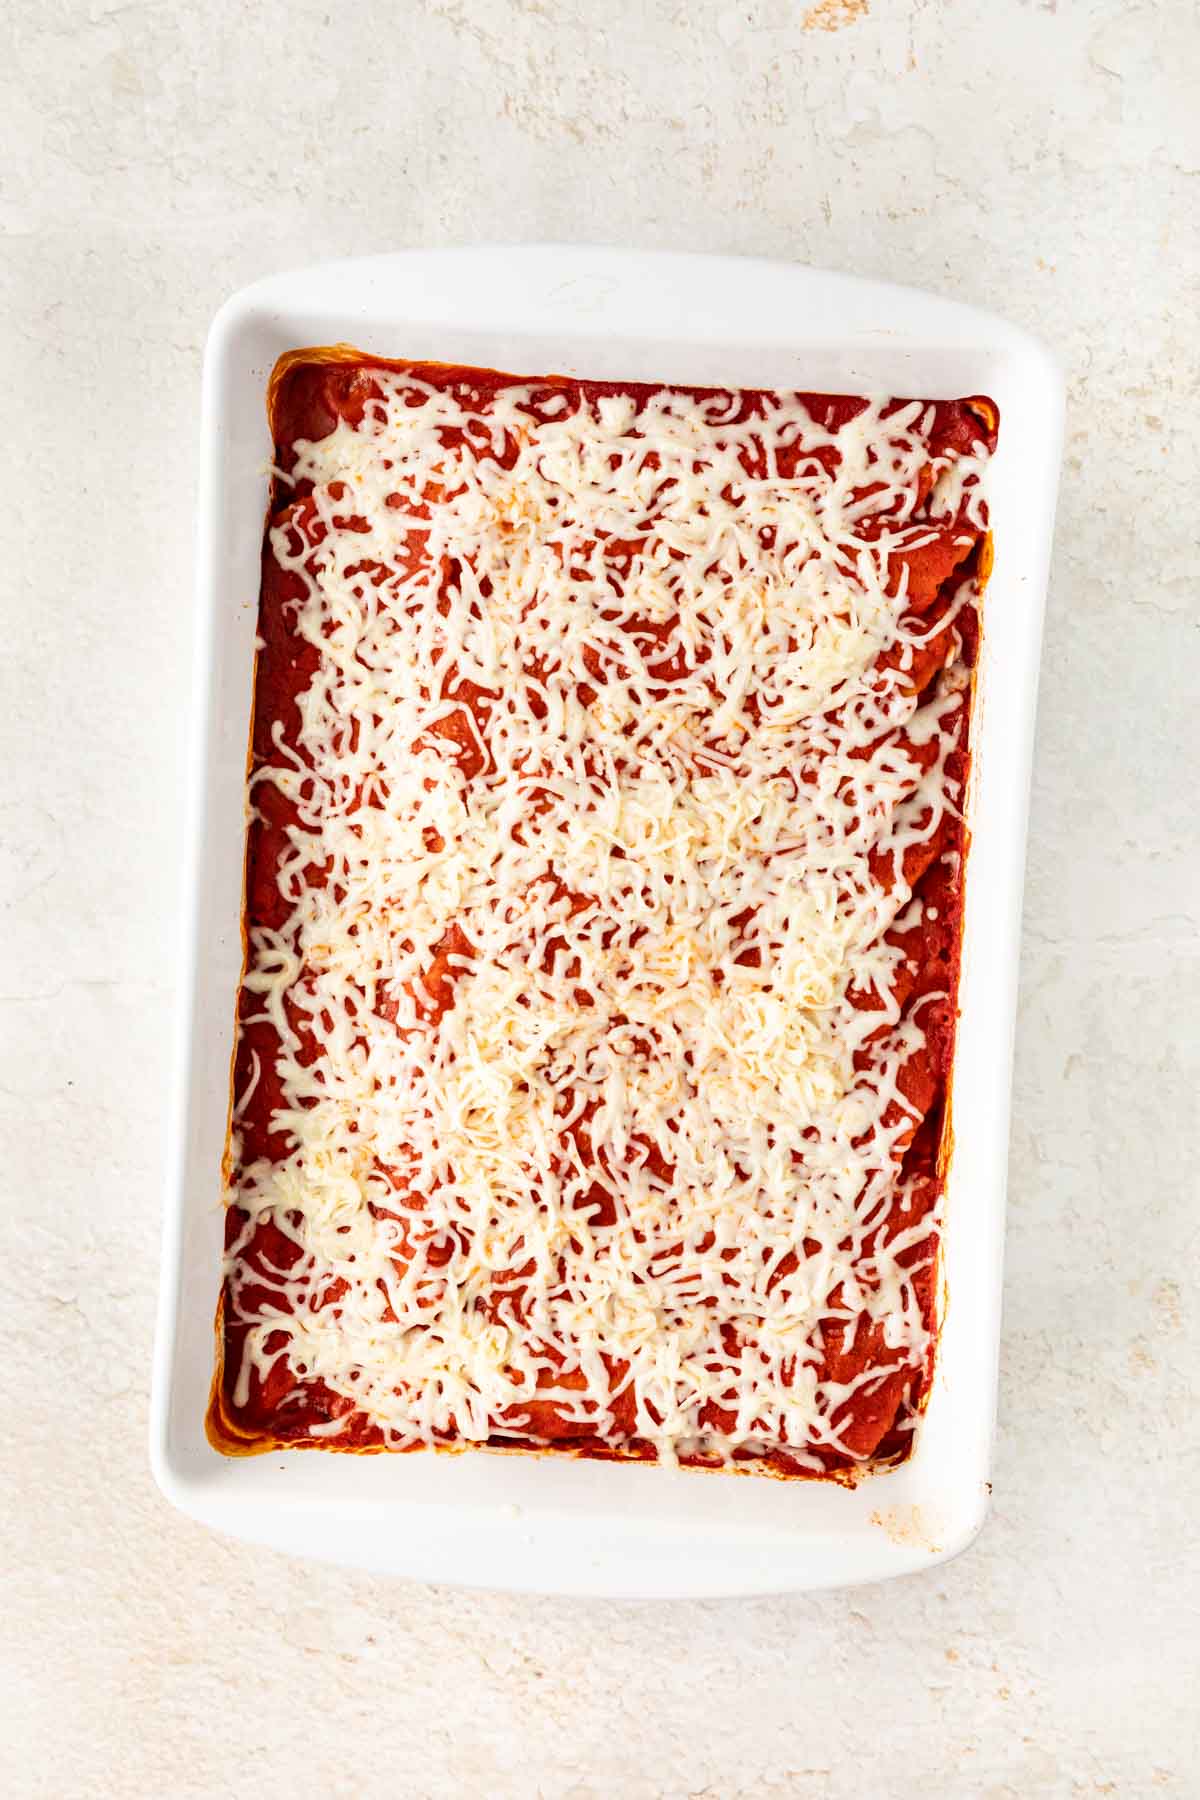 Cheesy Manicotti unbaked in pan with cheese